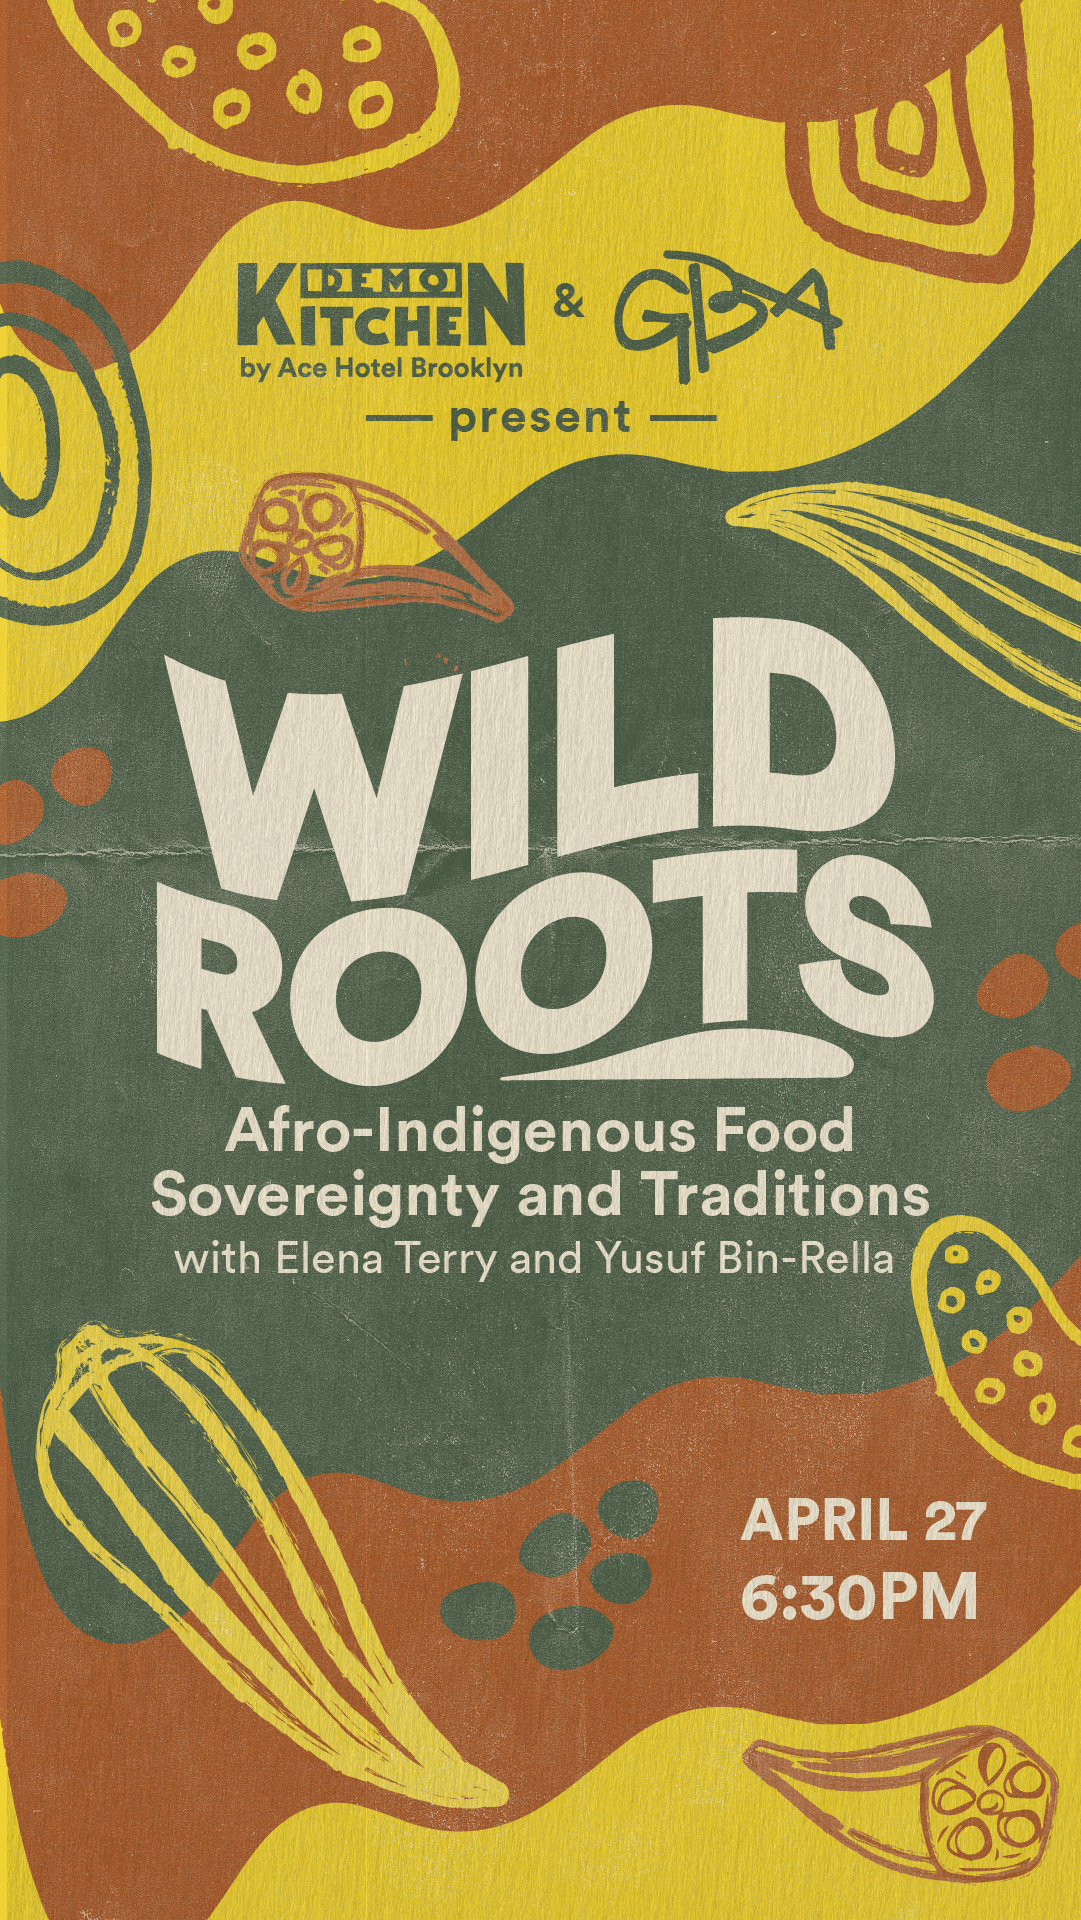 Wild Roots - Afro-Indigenous Food Sovereignty and Traditions - April 27 at 6:30 PM